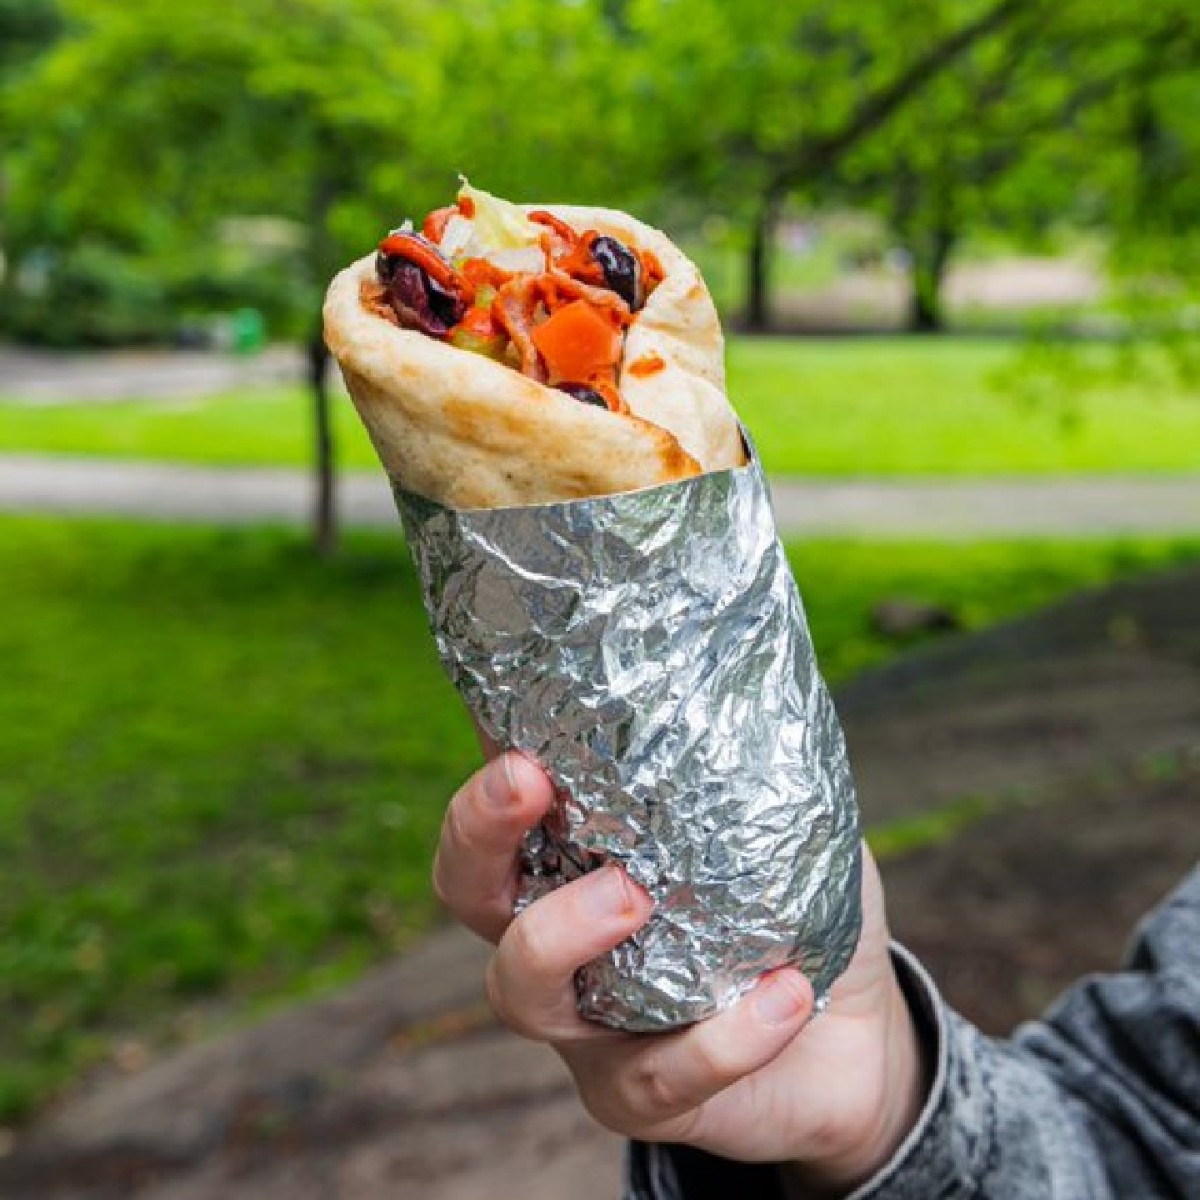 @butterflylocss Nothing says summer quite like grabbing your favorite sandwich from The Halal Guys (@HalalGuys) and walking over to your local park to enjoy 😋

#CentralPark #PicnicTime #OutdoorDining #Summer #SummerPlans #CityFoodie #Foodie #NewYorkFoodie #NYC #SummerTime #SummerEats